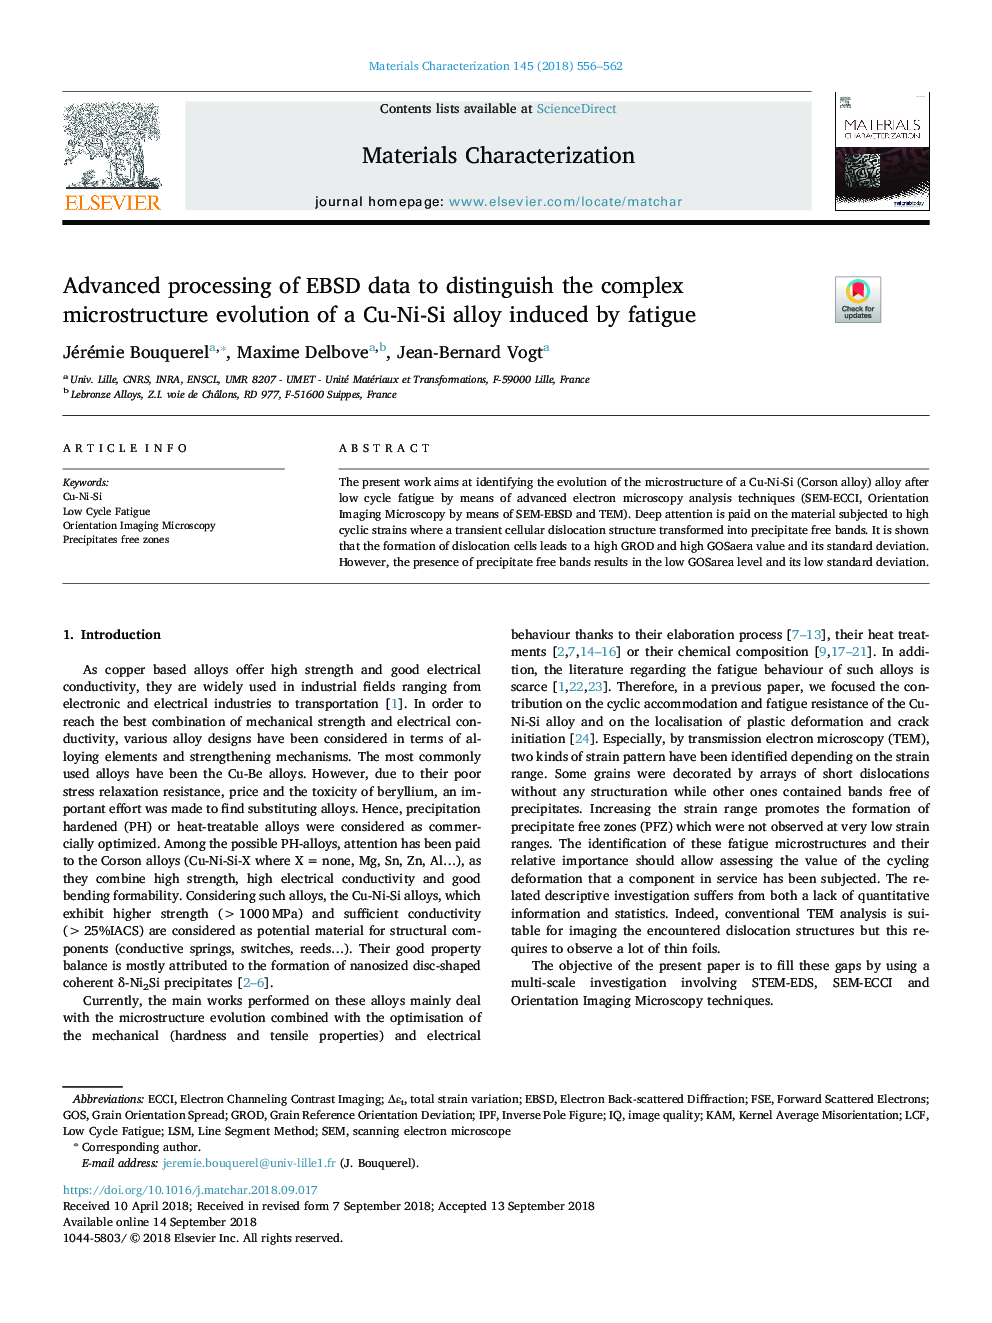 Advanced processing of EBSD data to distinguish the complex microstructure evolution of a Cu-Ni-Si alloy induced by fatigue